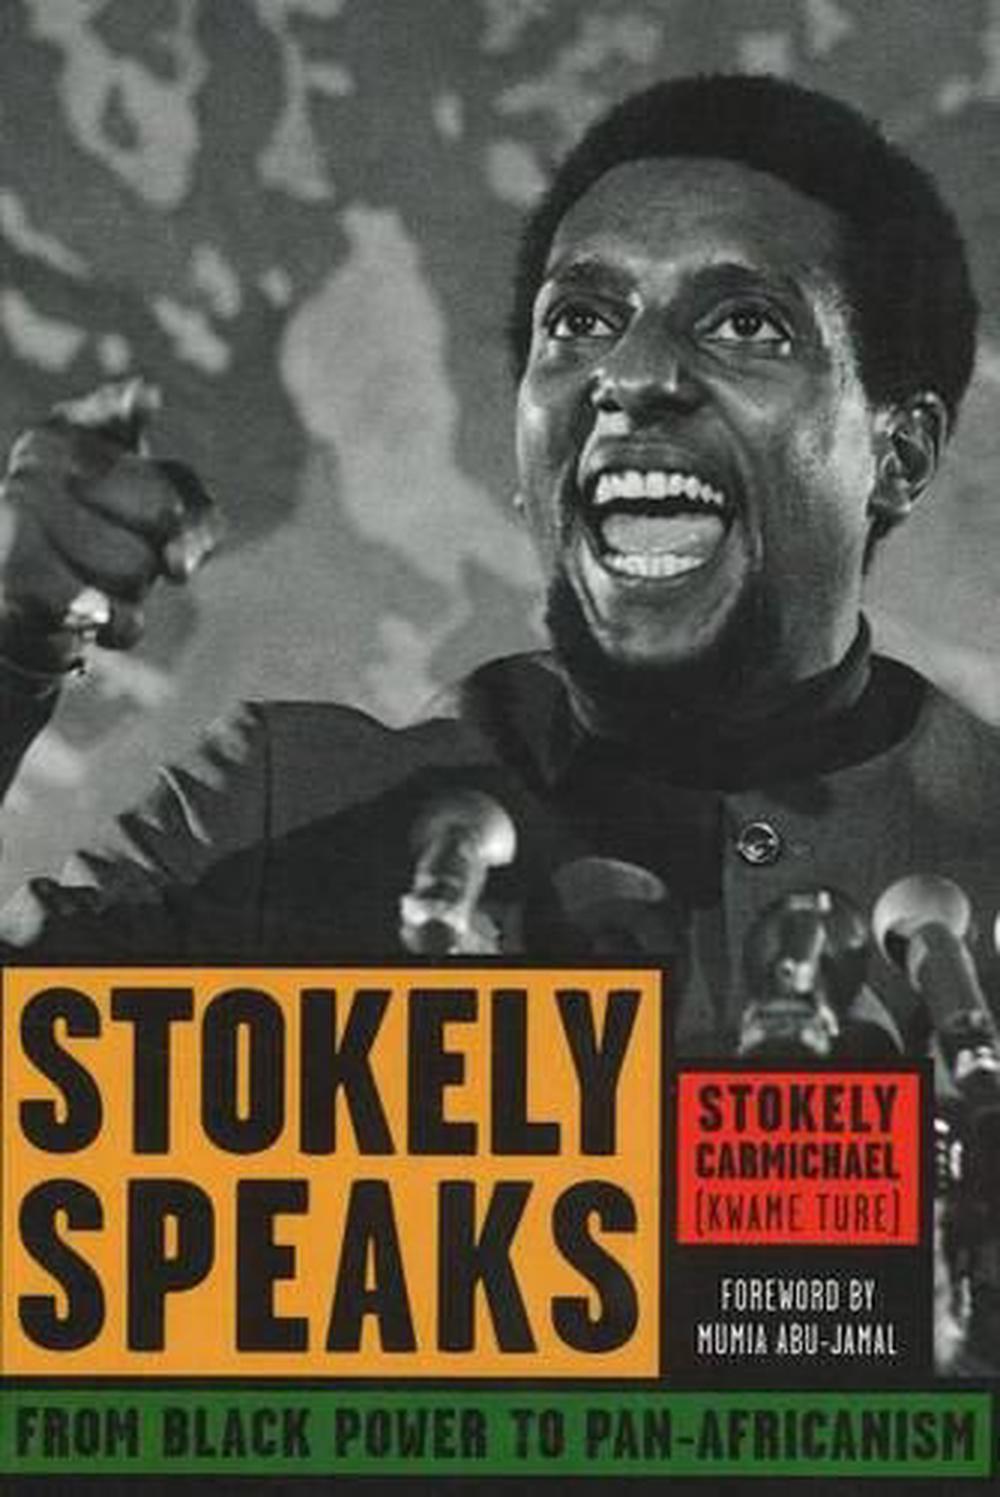 Stokely Speaks From Black Power to PanAfricanism by Stokely